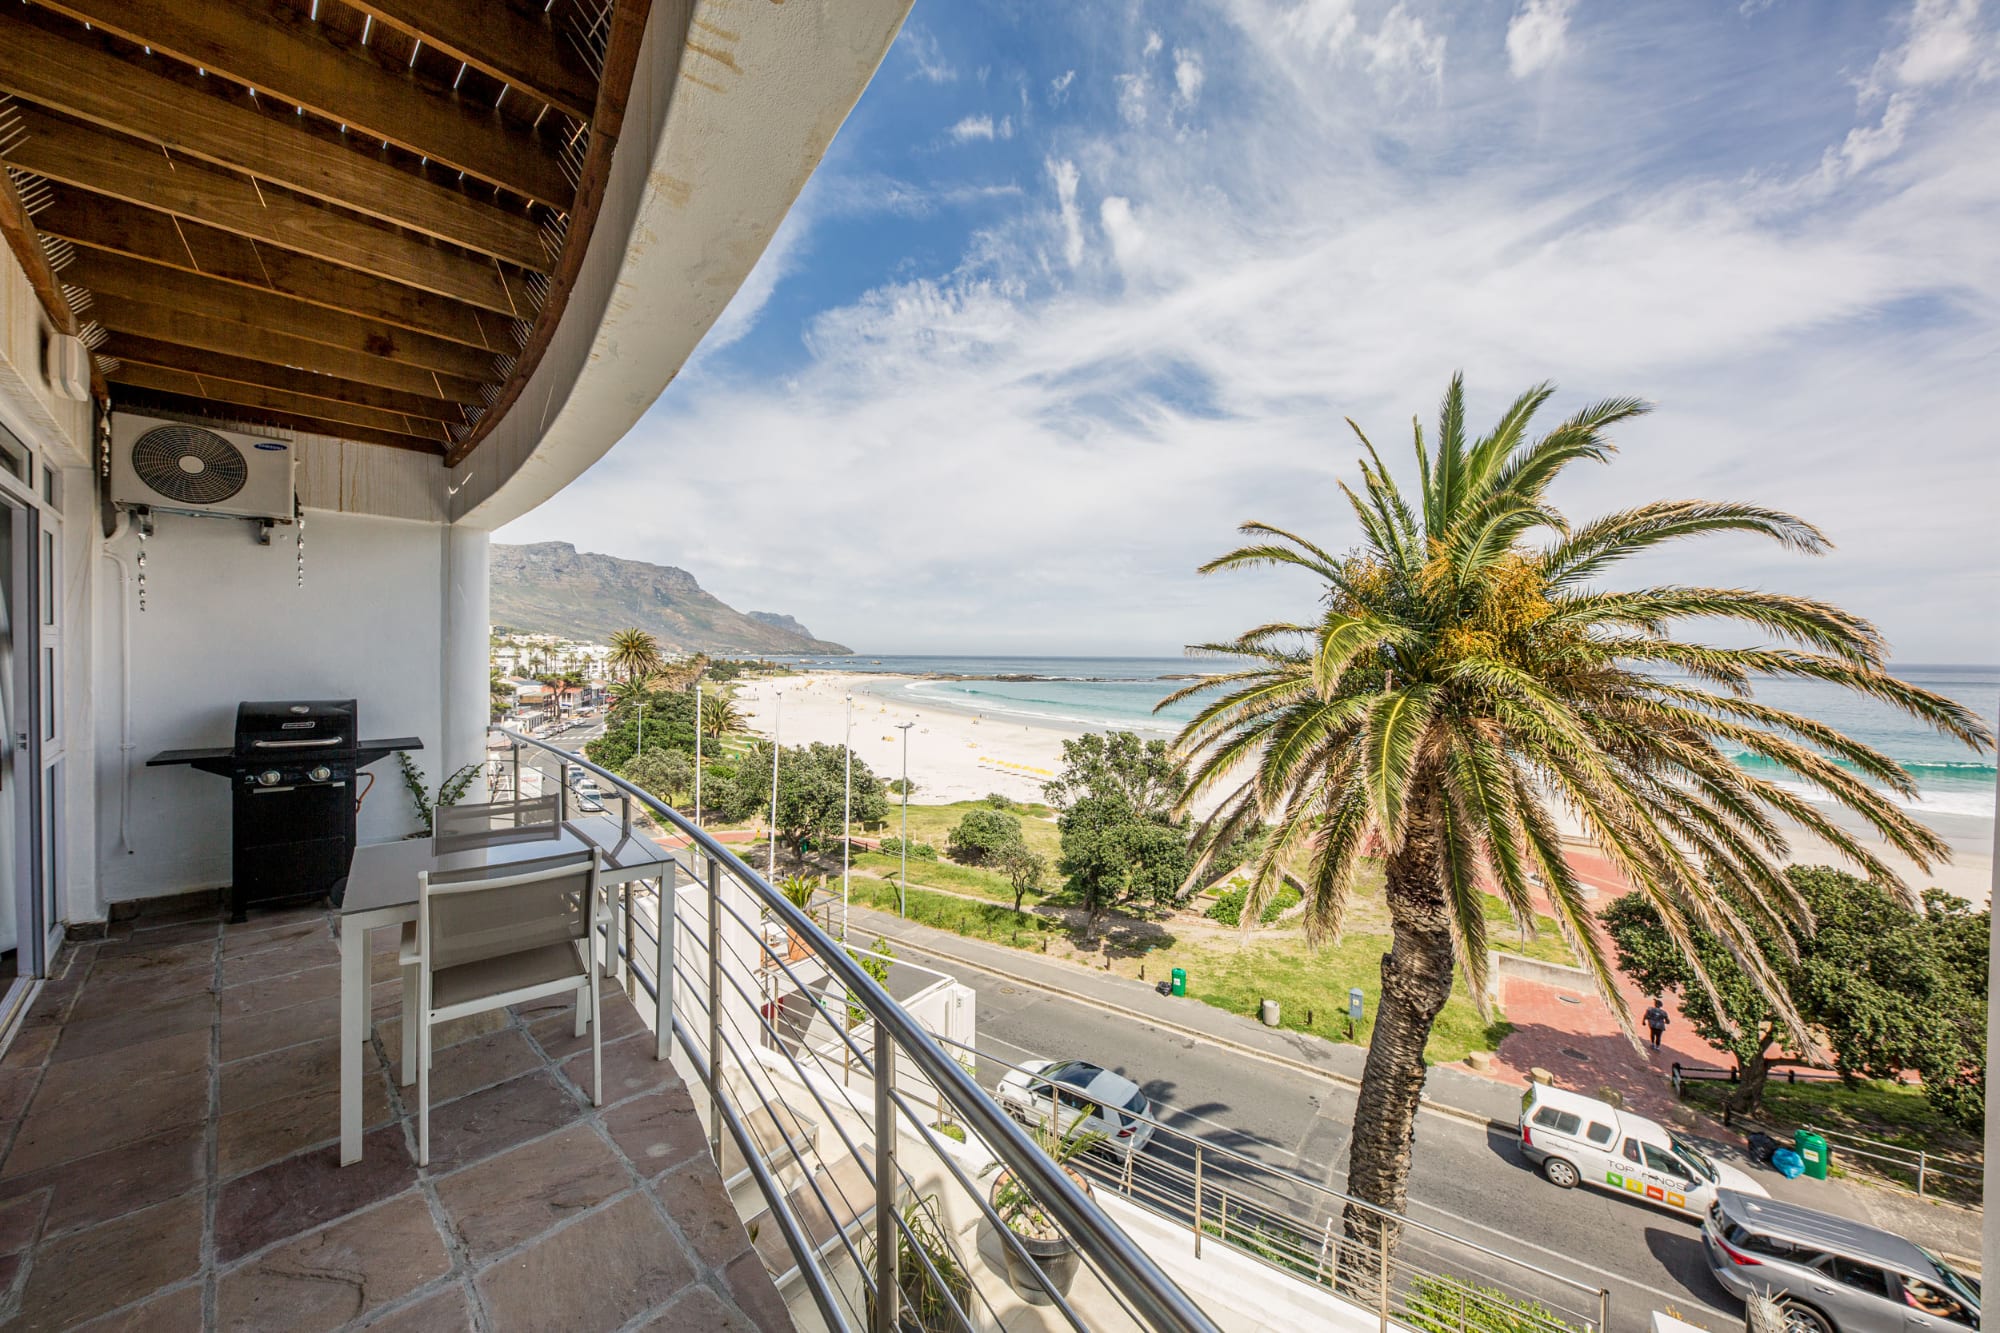 Cozy Apartment Opposite Camps Bay Beach Seasonsfind the Bay